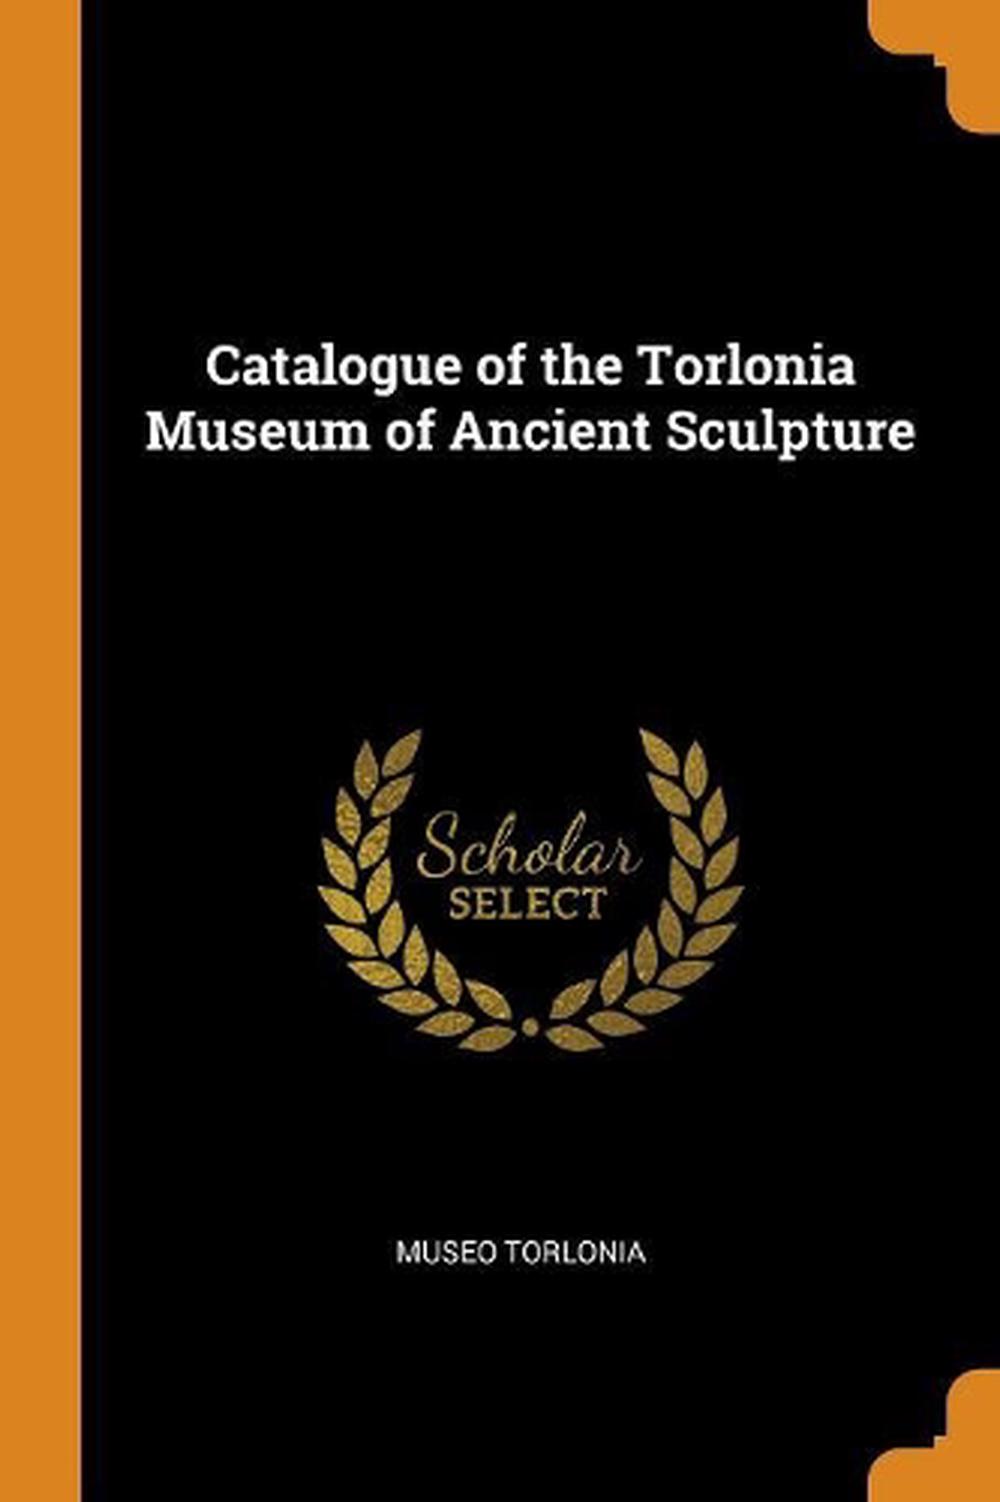 Catalogue of the Torlonia Museum of Ancient Sculpture by Museo Torlonia ...